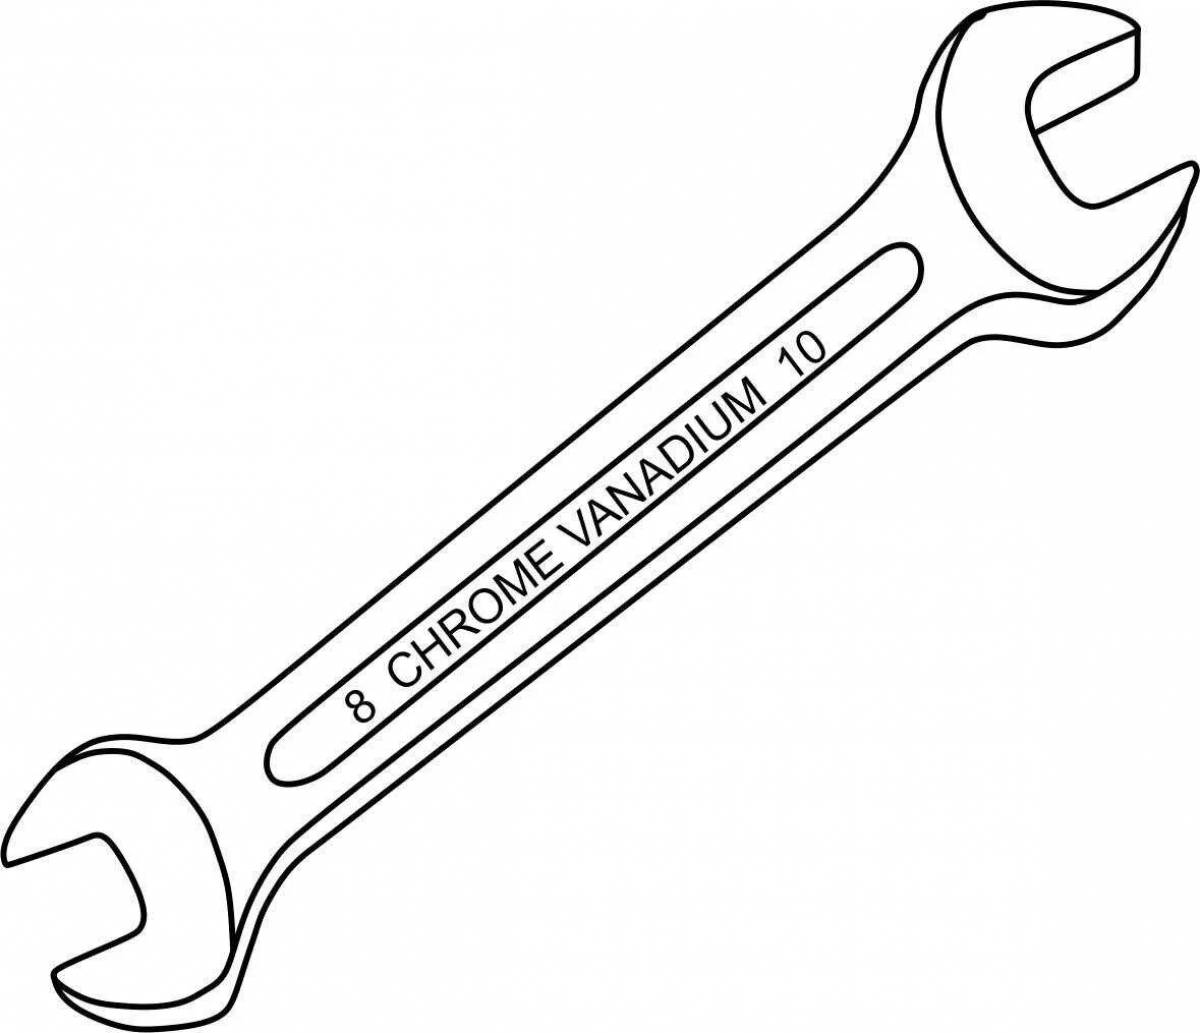 Gorgeous wrench coloring page